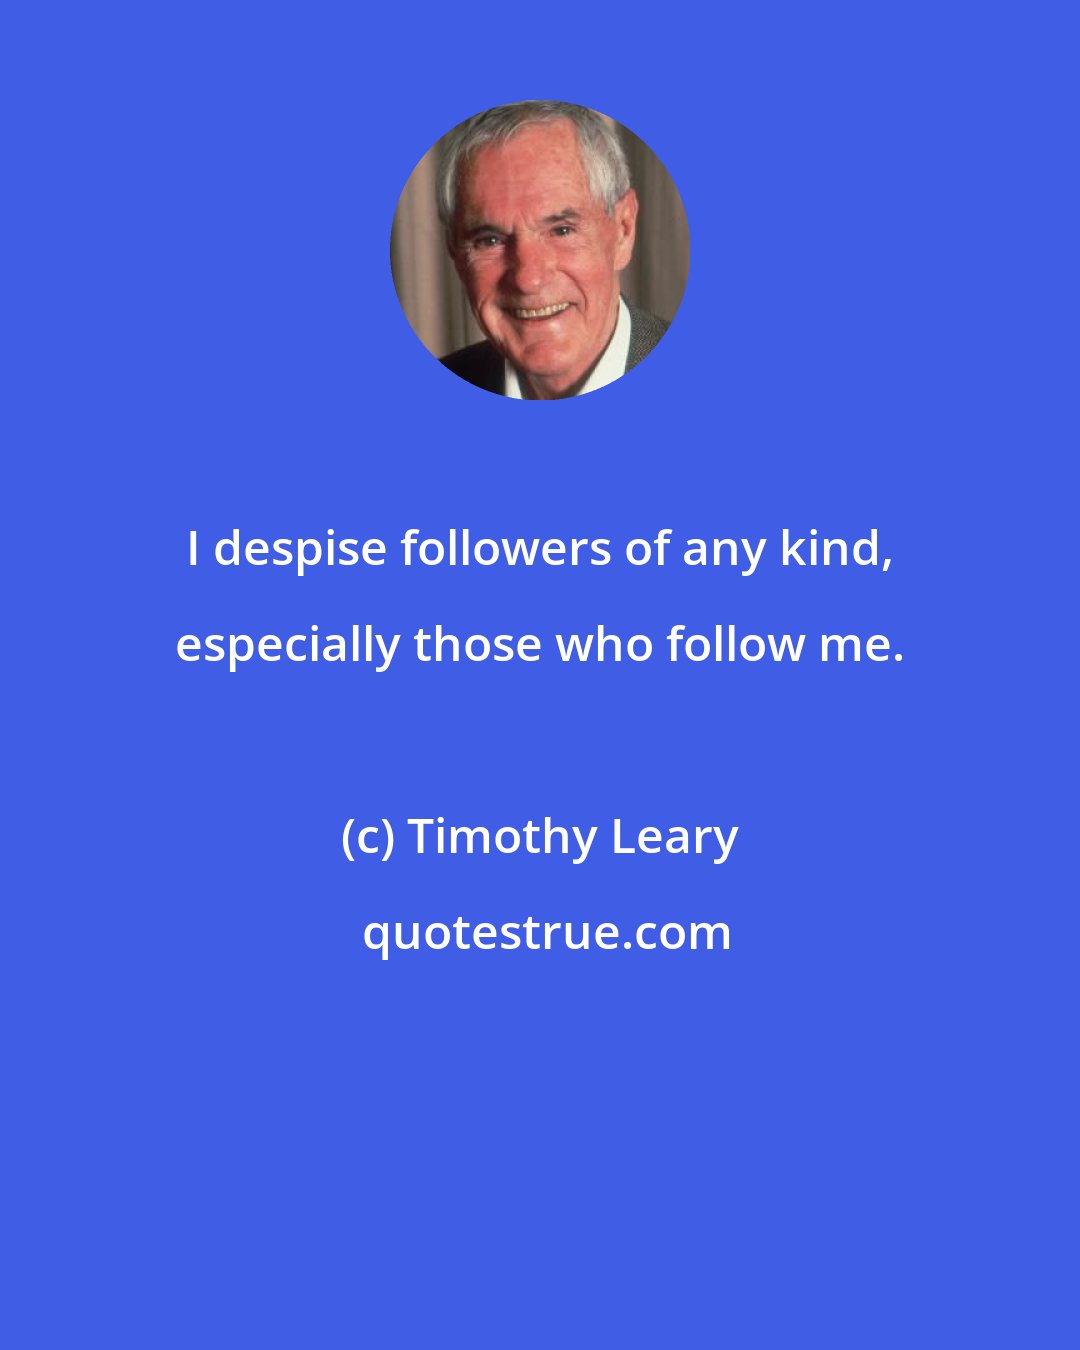 Timothy Leary: I despise followers of any kind, especially those who follow me.